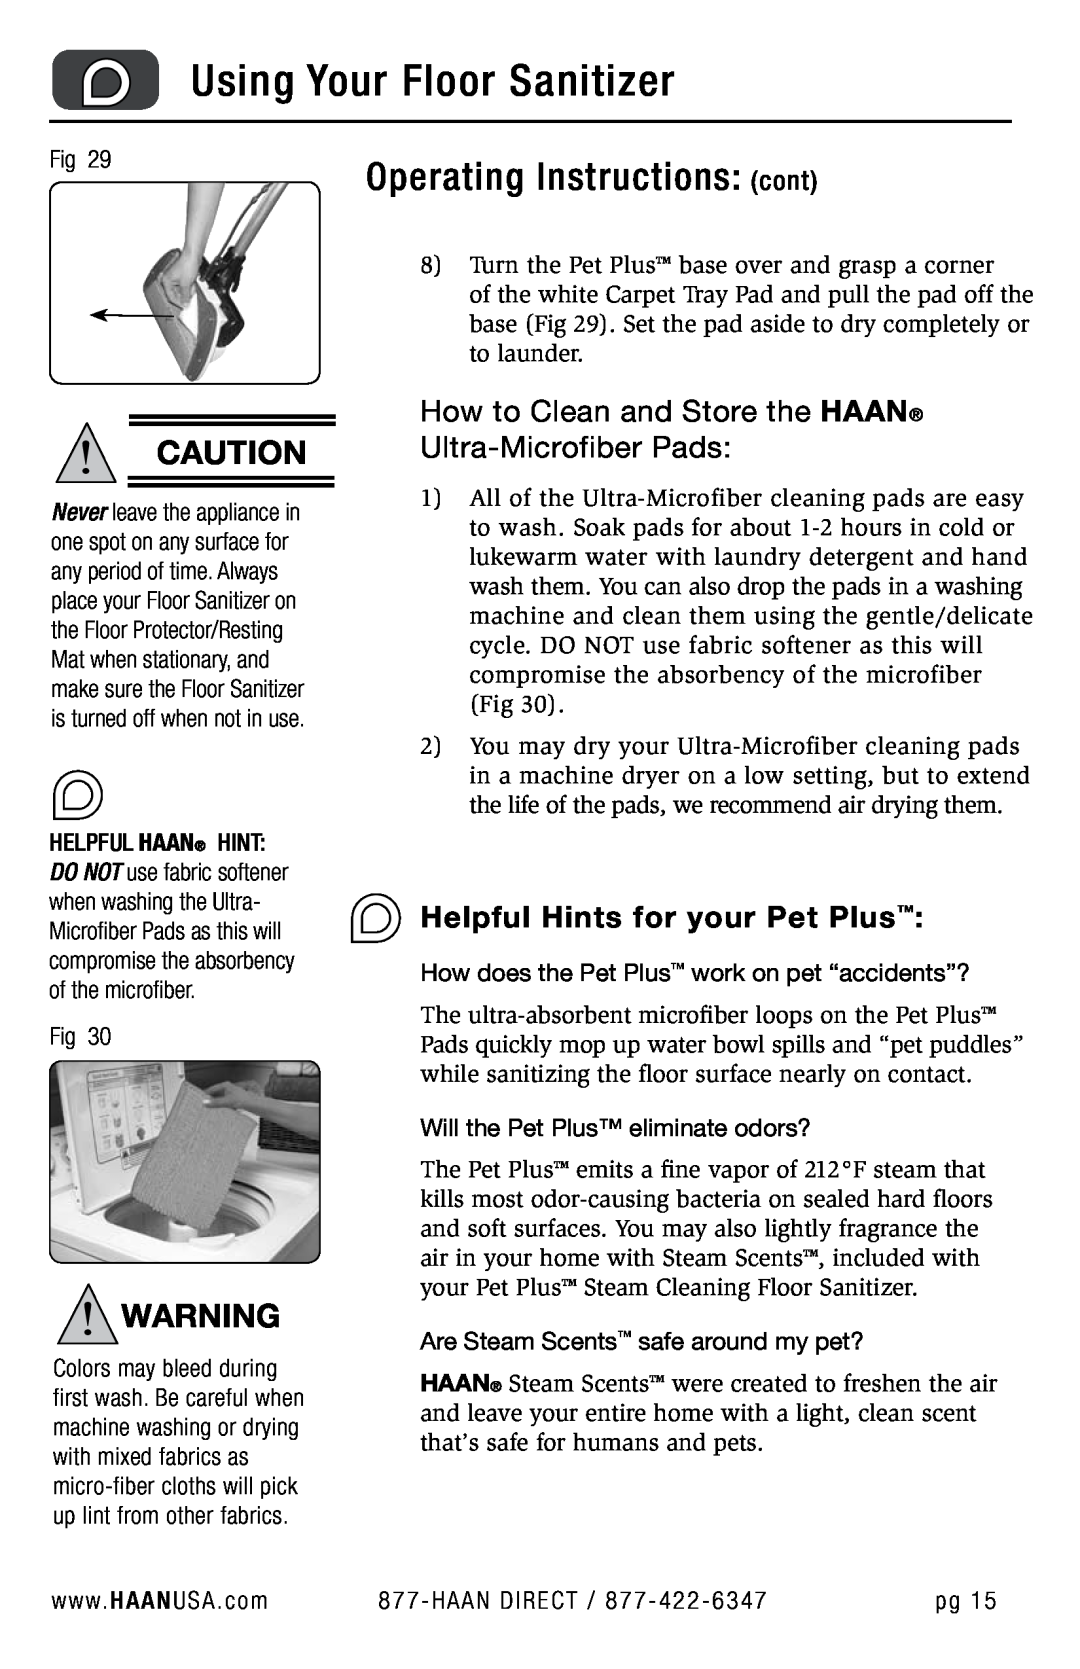 Haan FS-30P+ user manual How to Clean and Store the HAAN Ultra-Microfiber Pads, Using Your Floor Sanitizer 